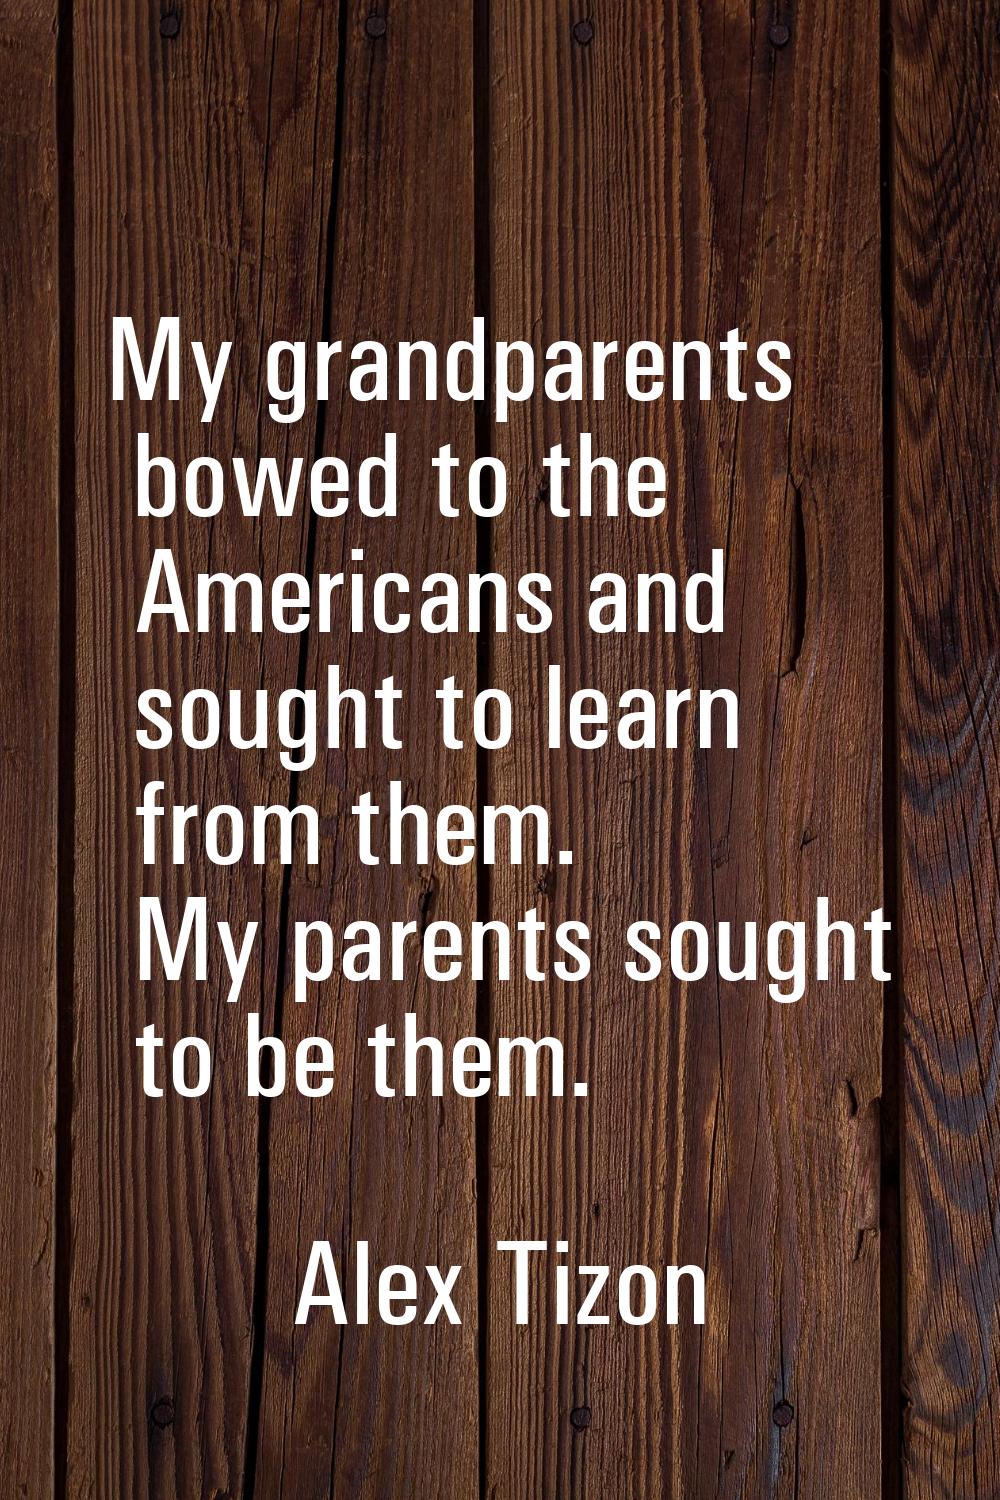 My grandparents bowed to the Americans and sought to learn from them. My parents sought to be them.